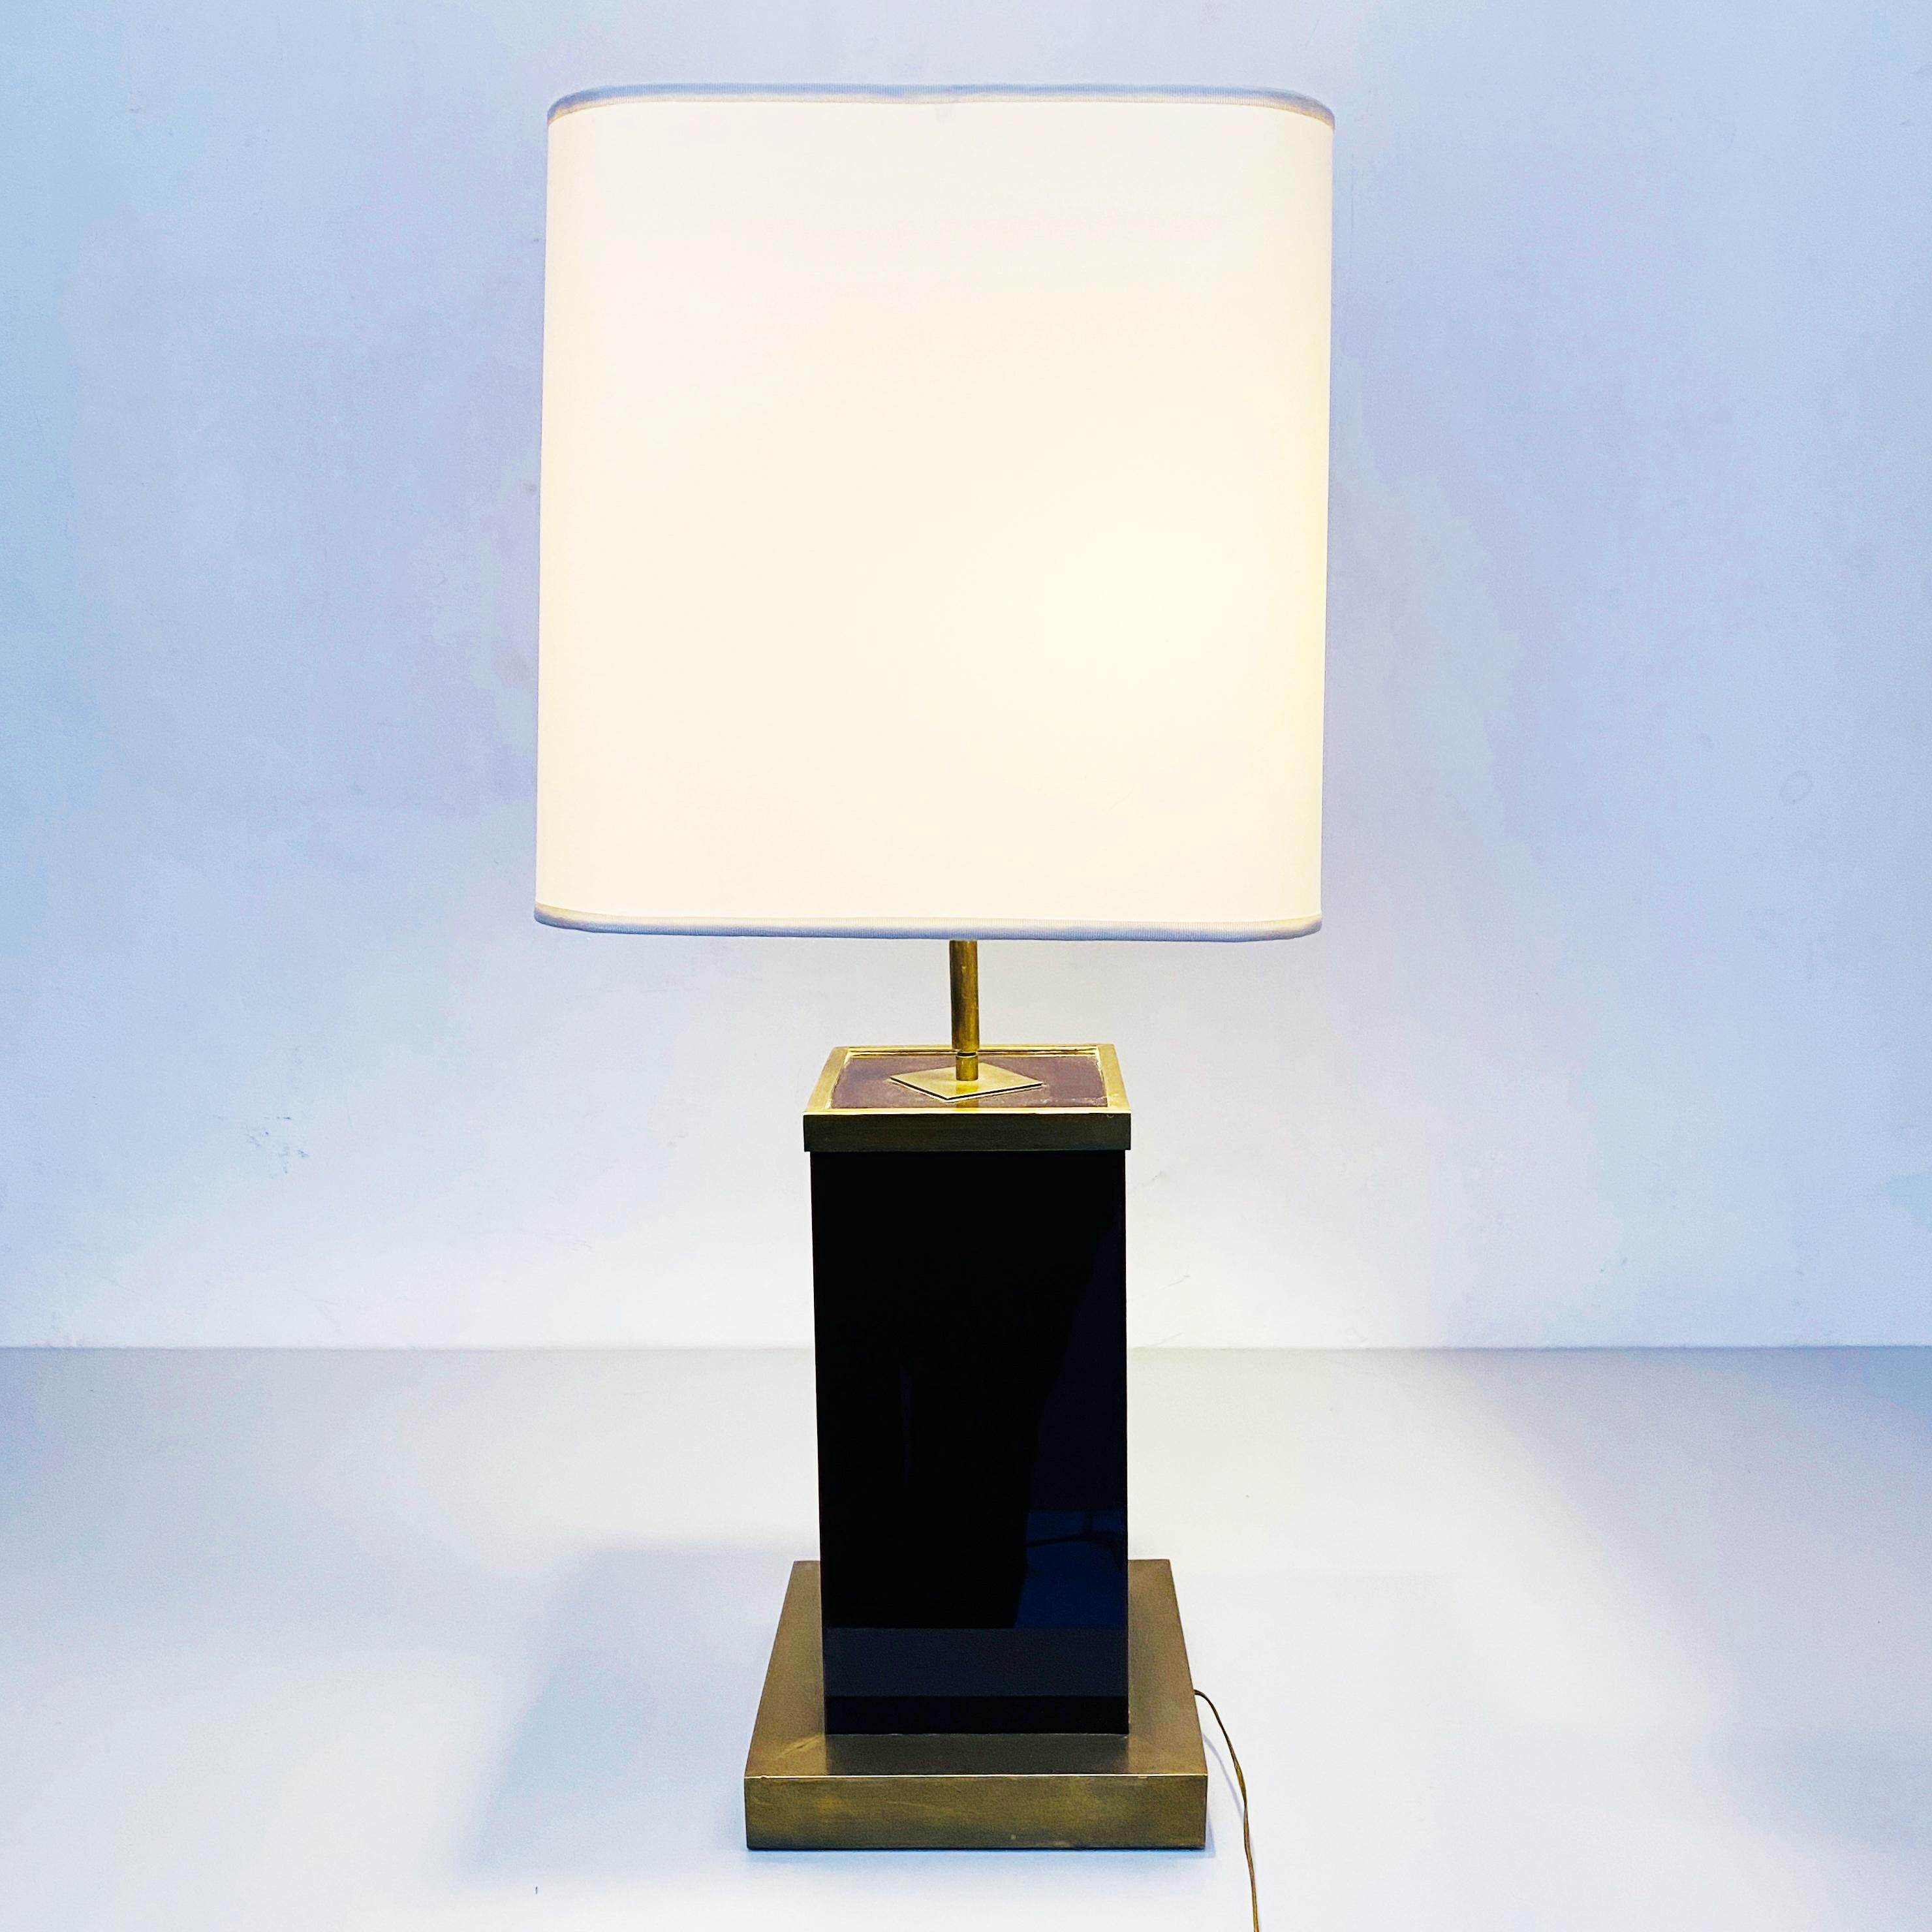 Italian Mid-Century Brown Plexiglass, White Fabric and Brass Table Lamp, 1970s For Sale 2